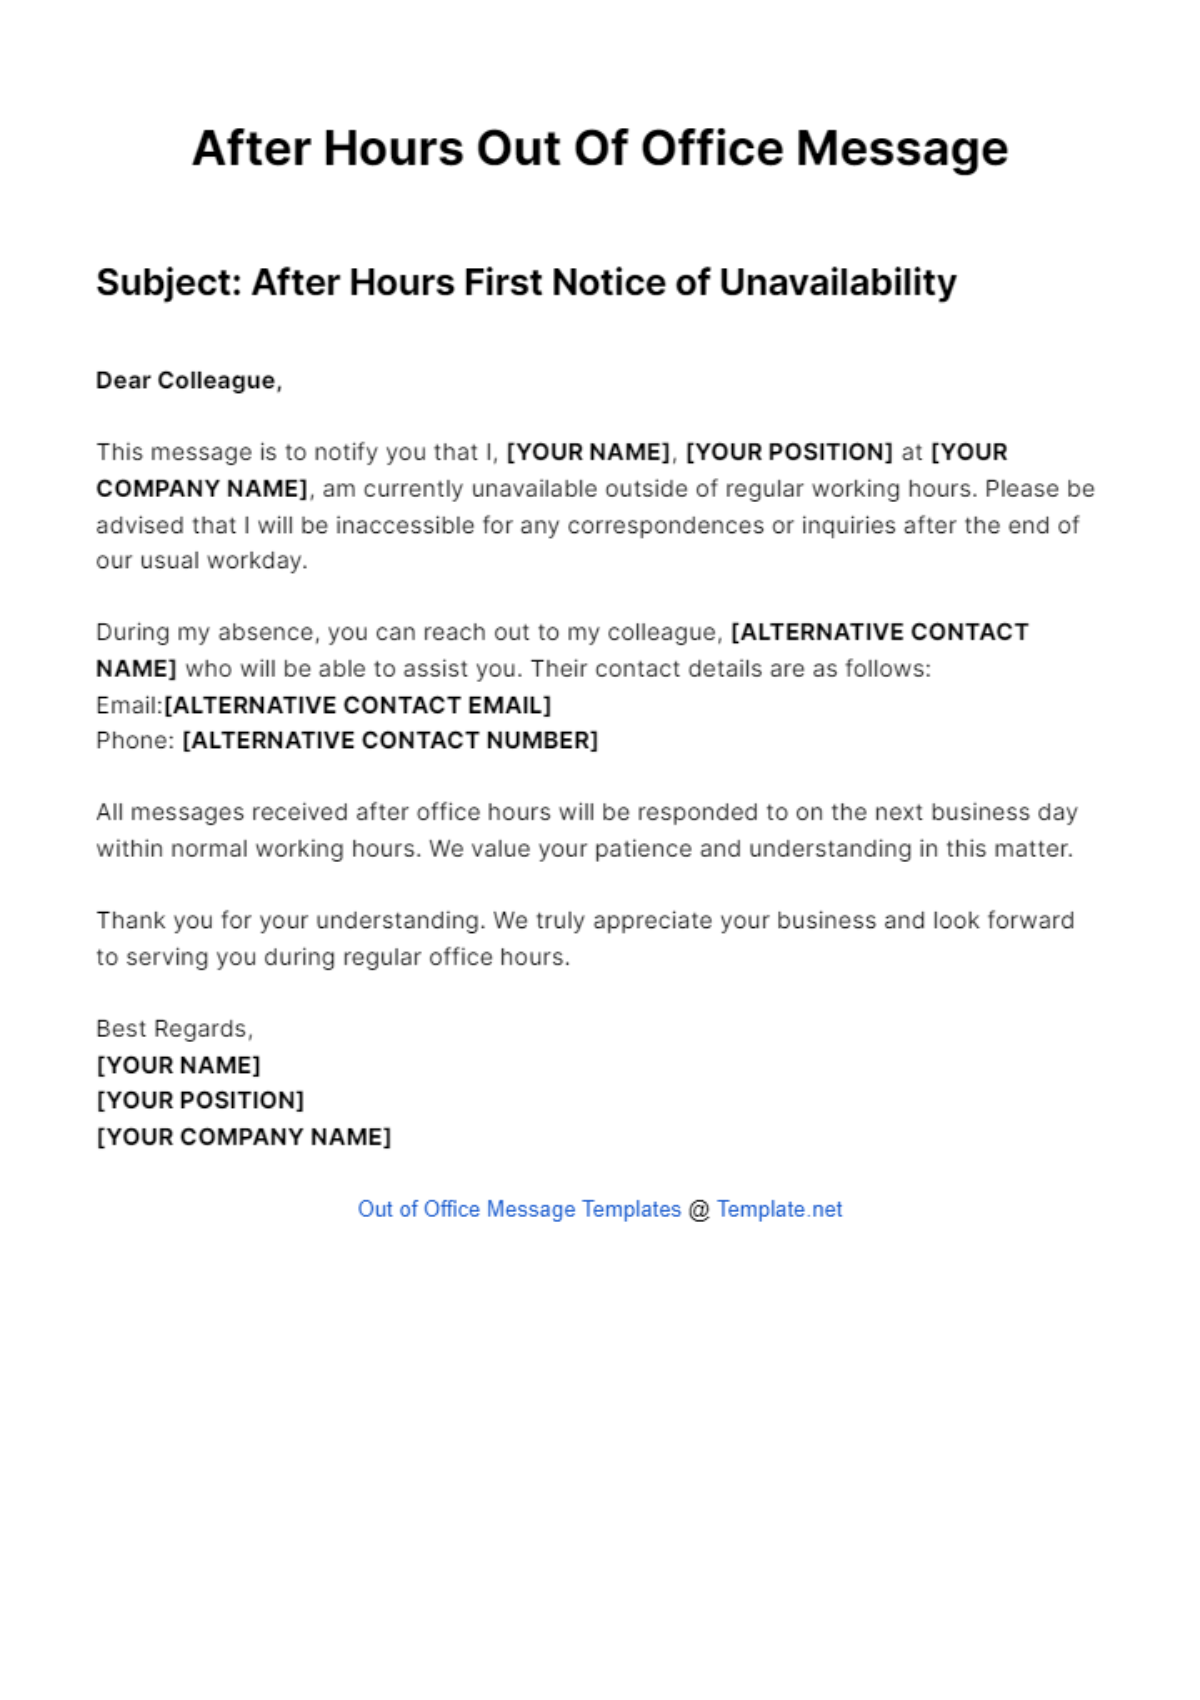 After Hours Out Of Office Message Template